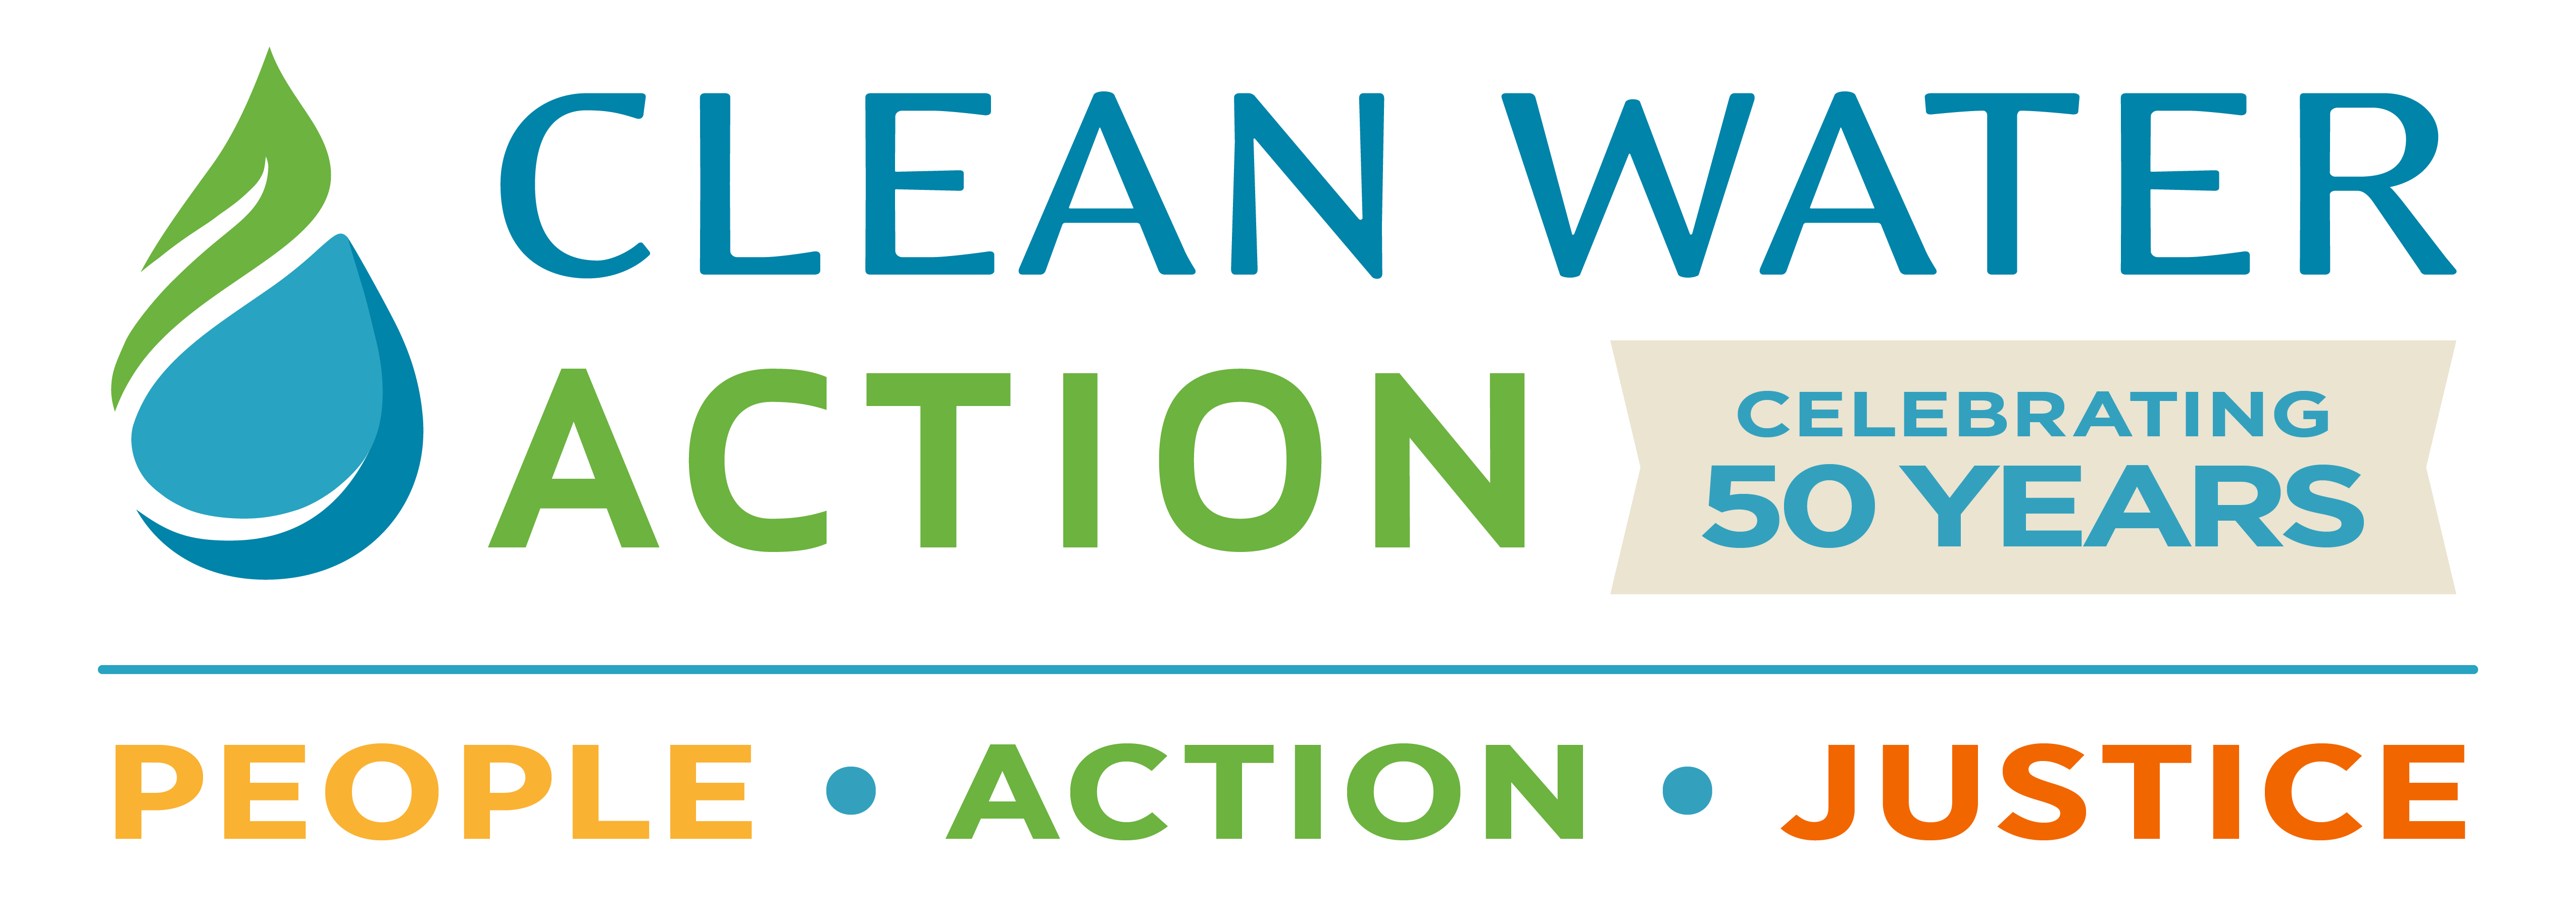 50 years of action for clean water!